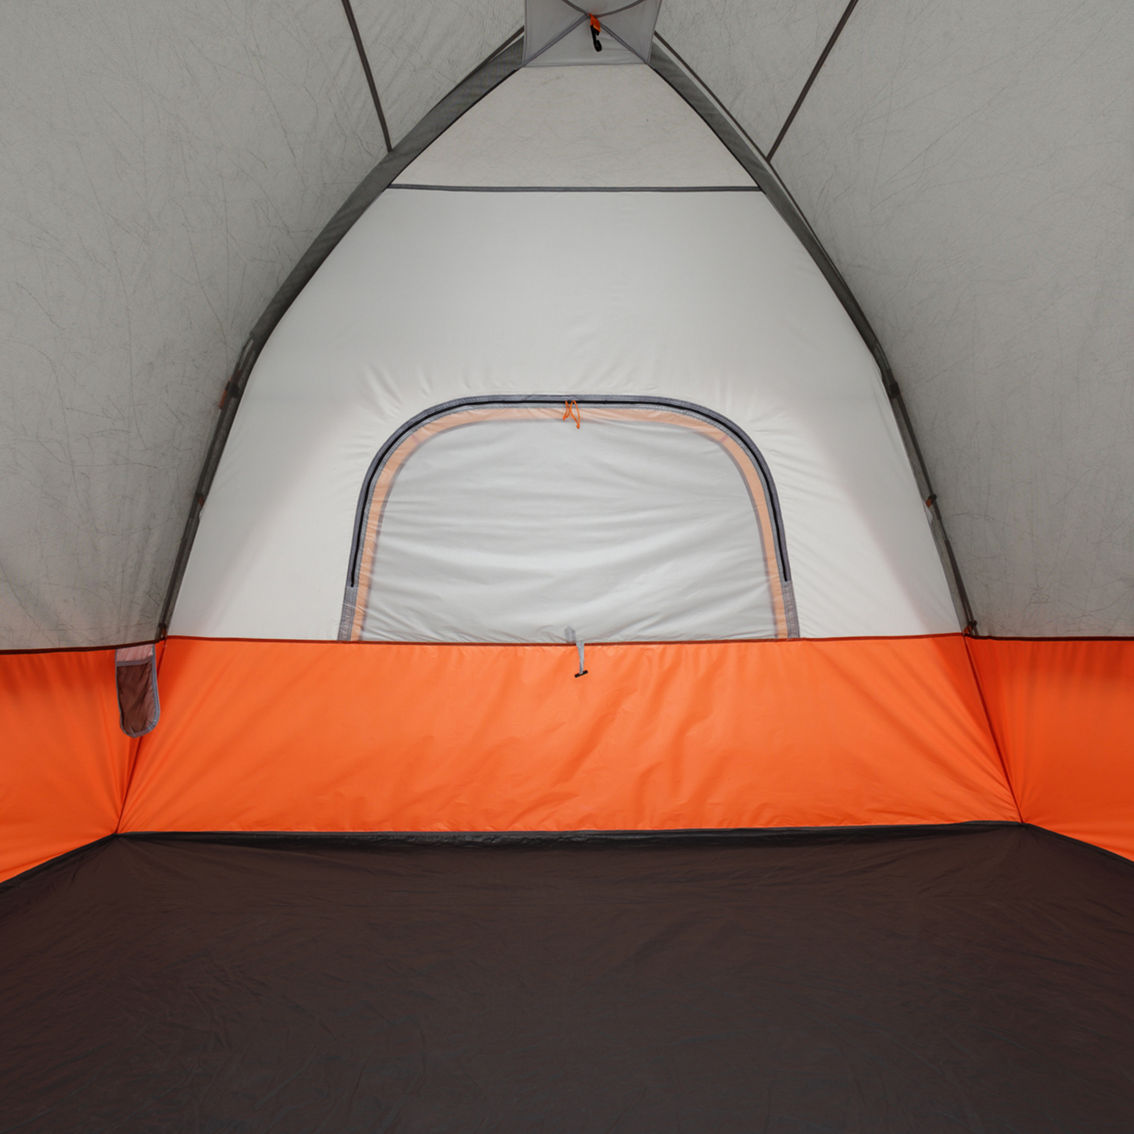 Core Equipment 6 Person Dome Tent - Image 4 of 6